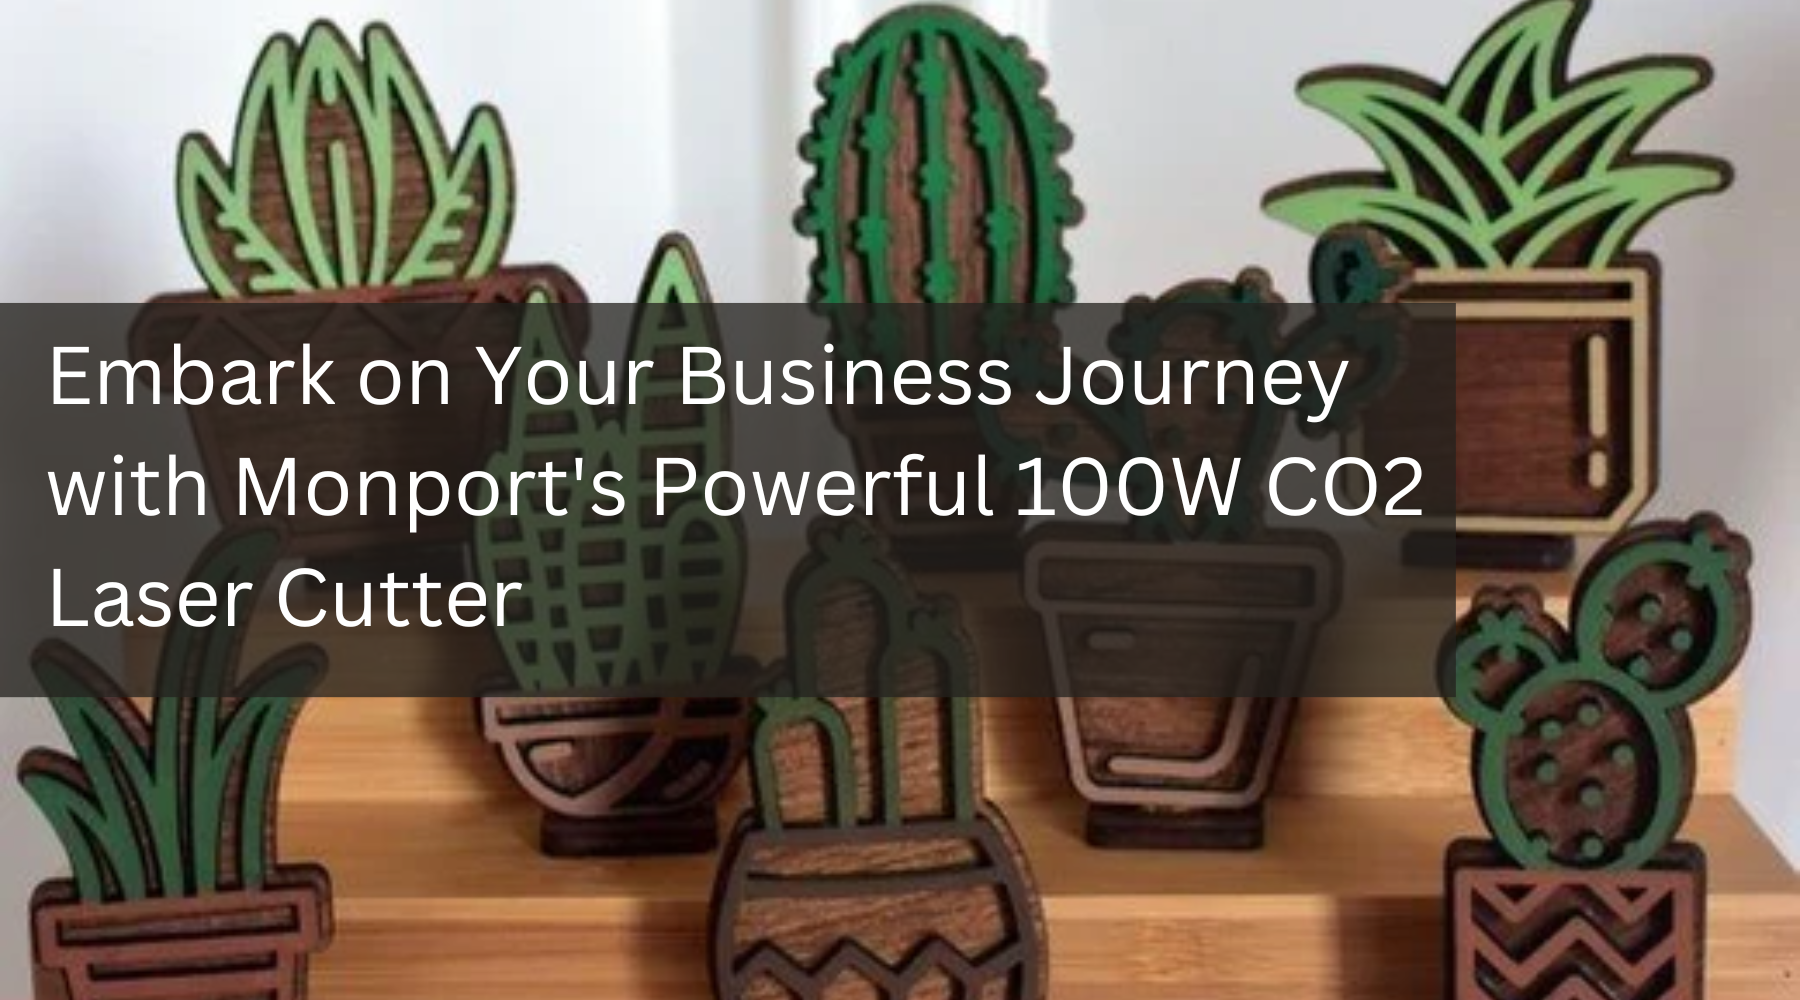 Embark on Your Business Journey with Monport's Powerful 100W CO2 Laser Cutter